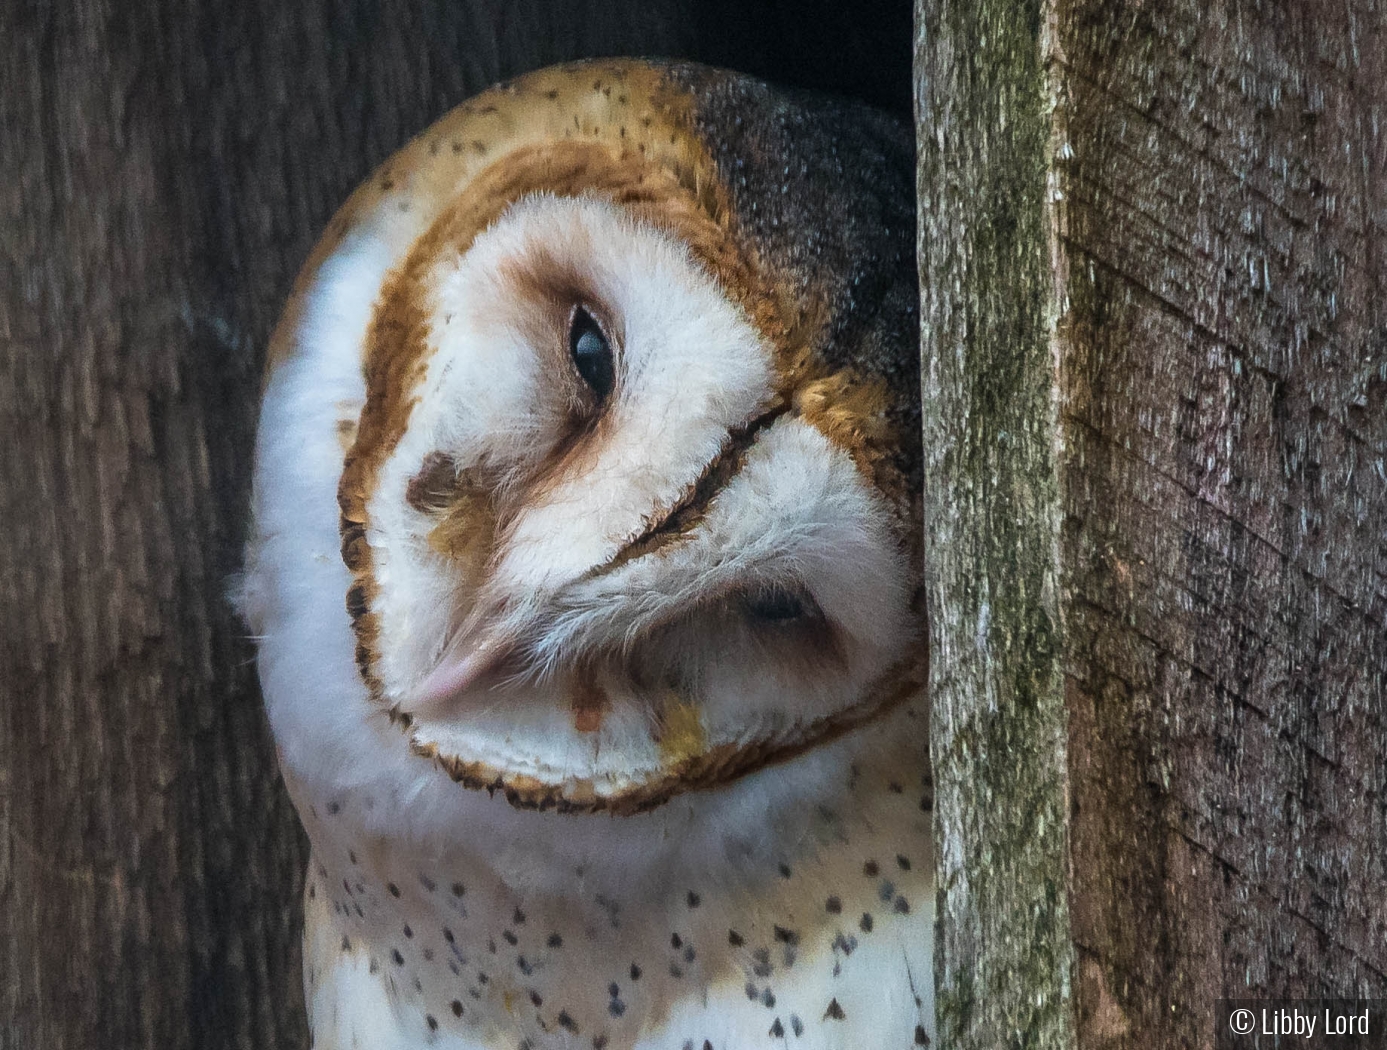 The Sweetness of a Barn Owl by Libby Lord